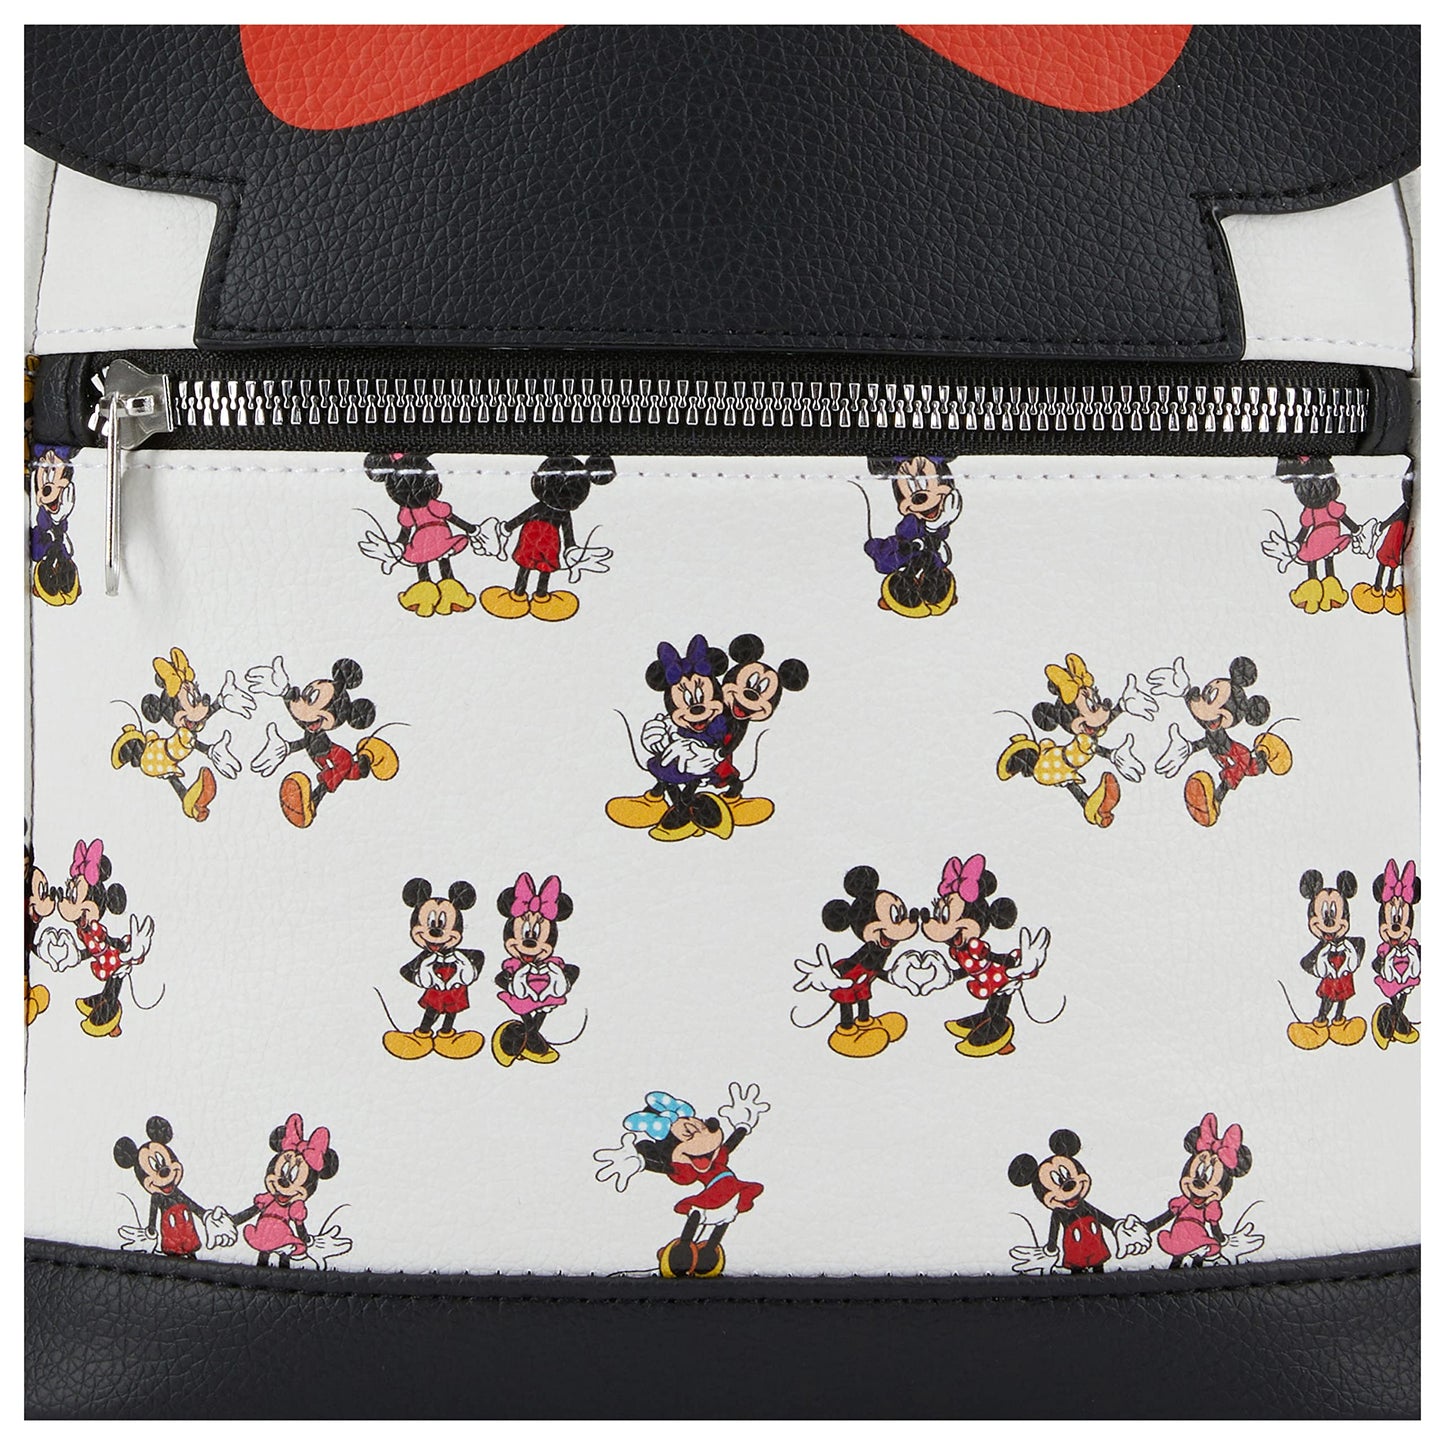 Disney Minnie Mouse Allover Backpack